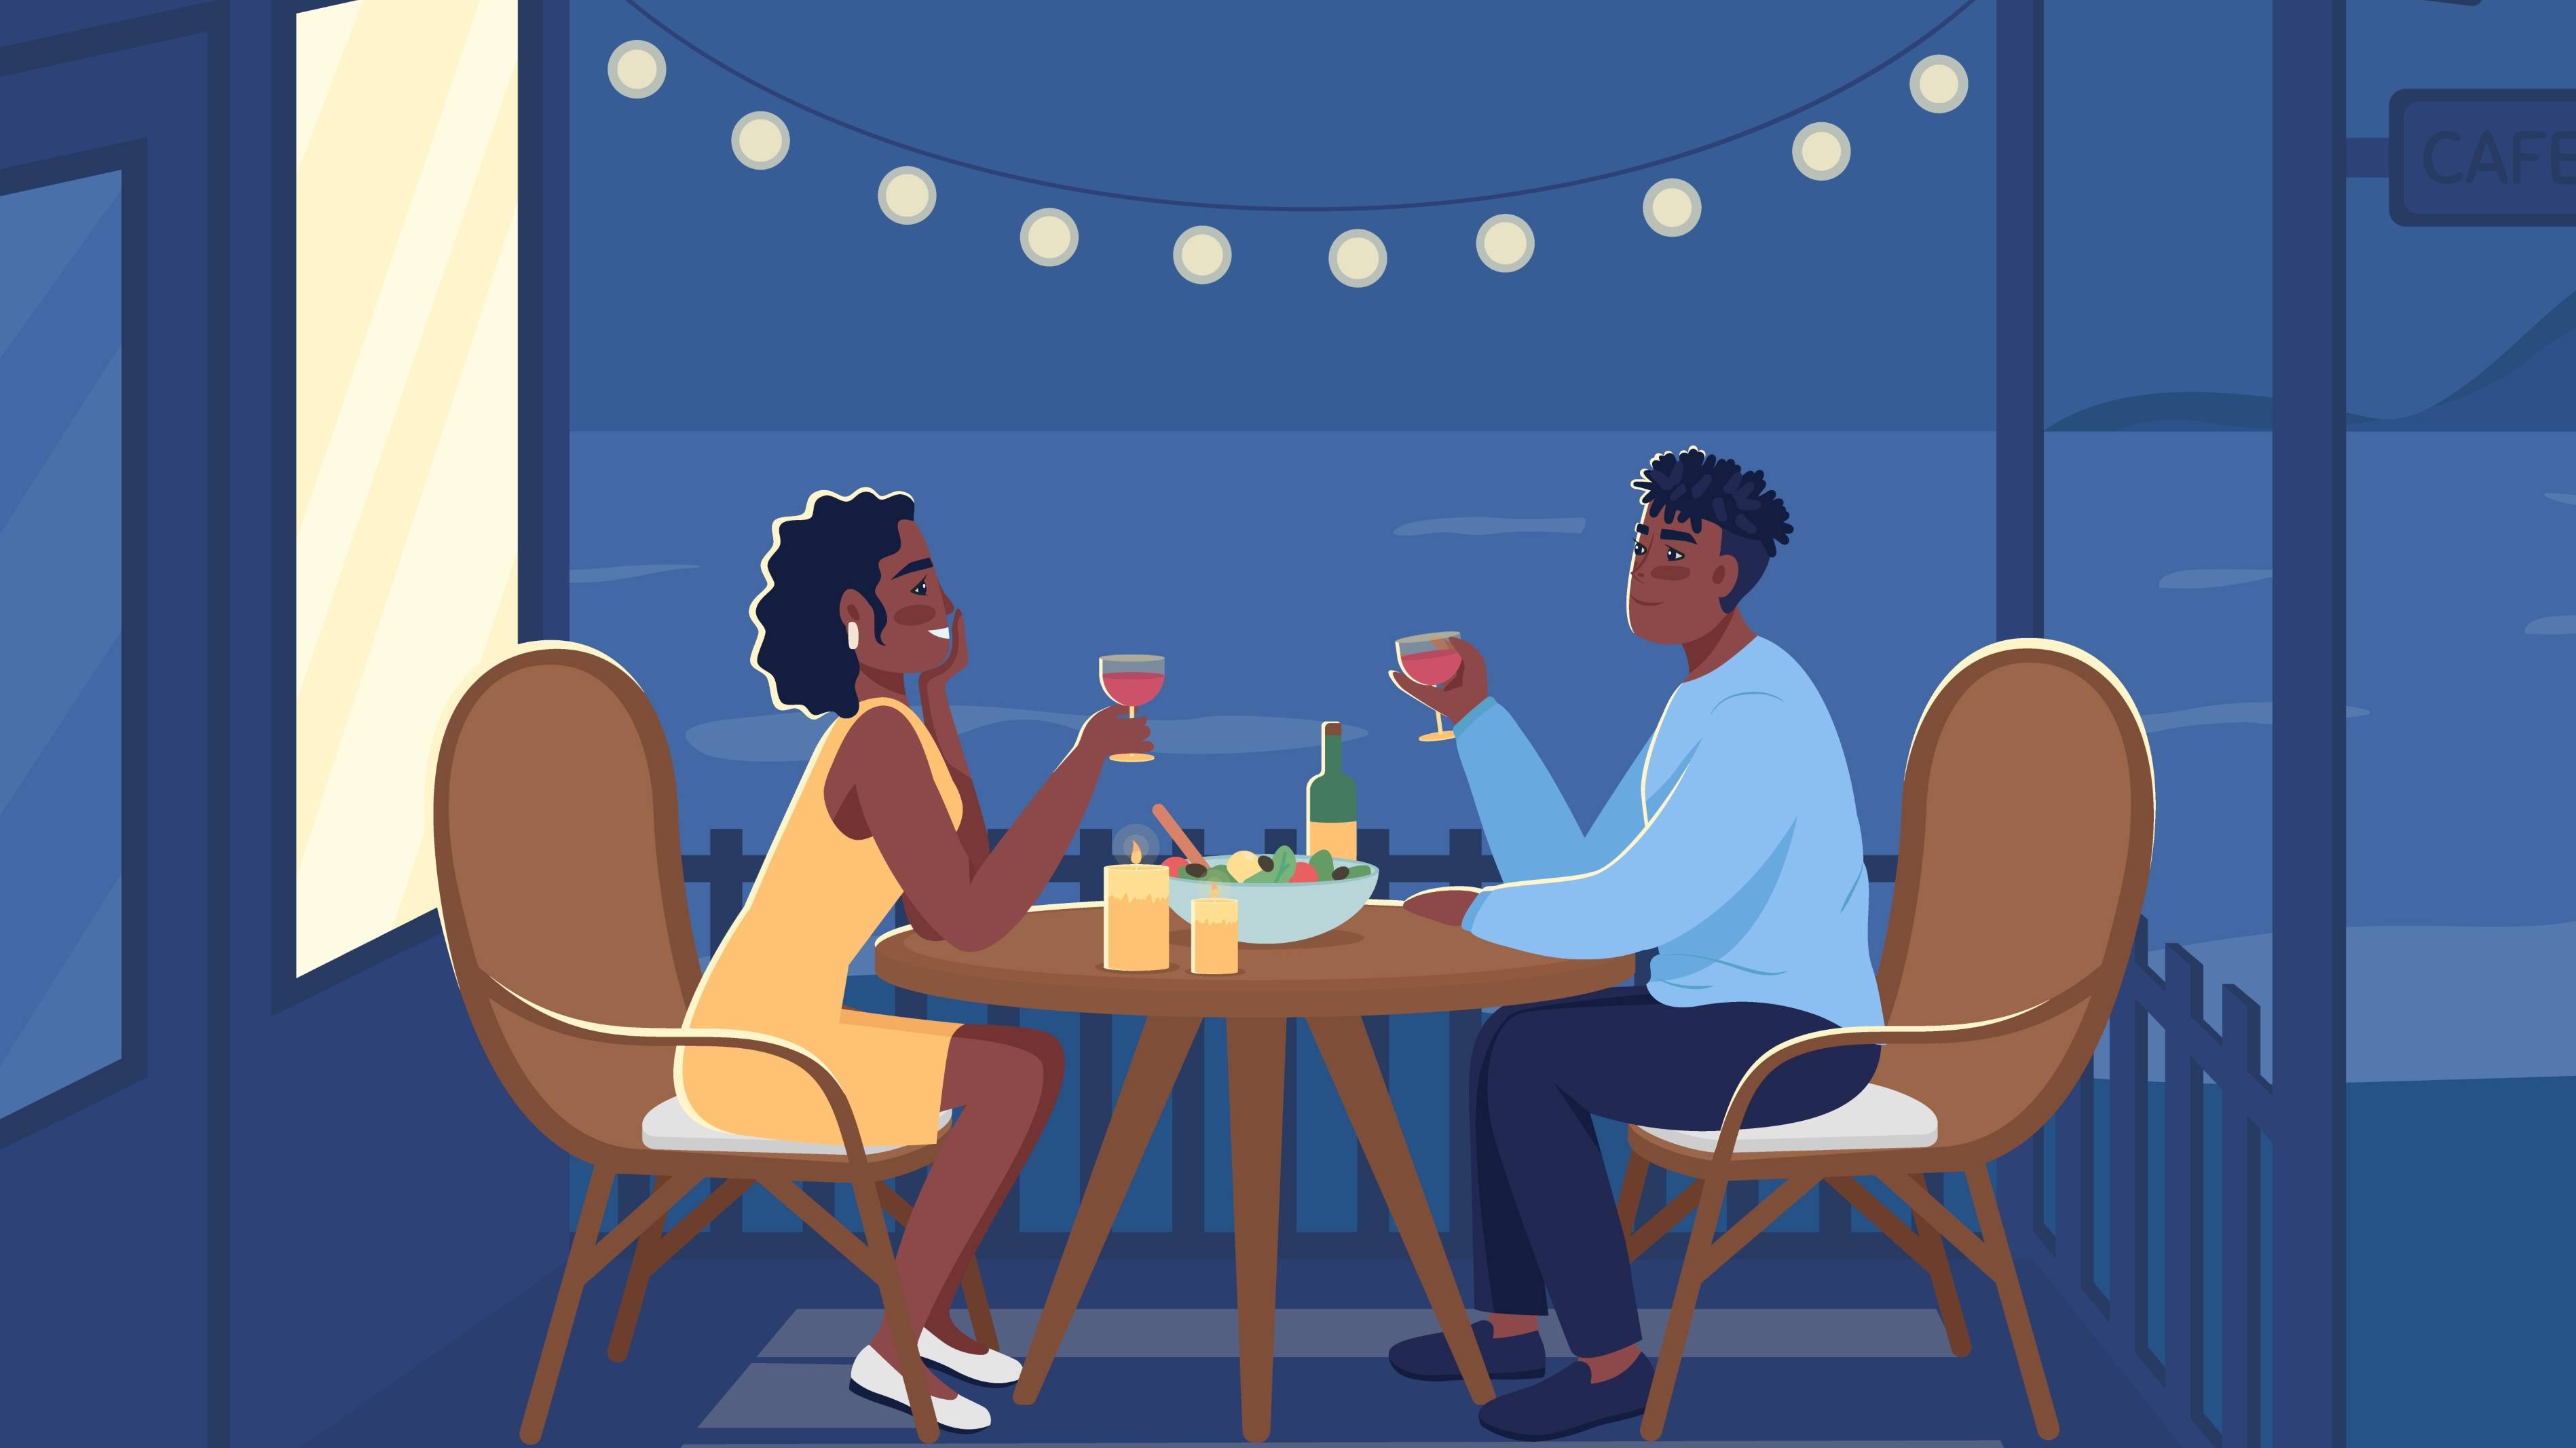 Illustration of boyfriend and girlfriend 2D cartoon characters with seaside landscape on background, romantic dinner. 